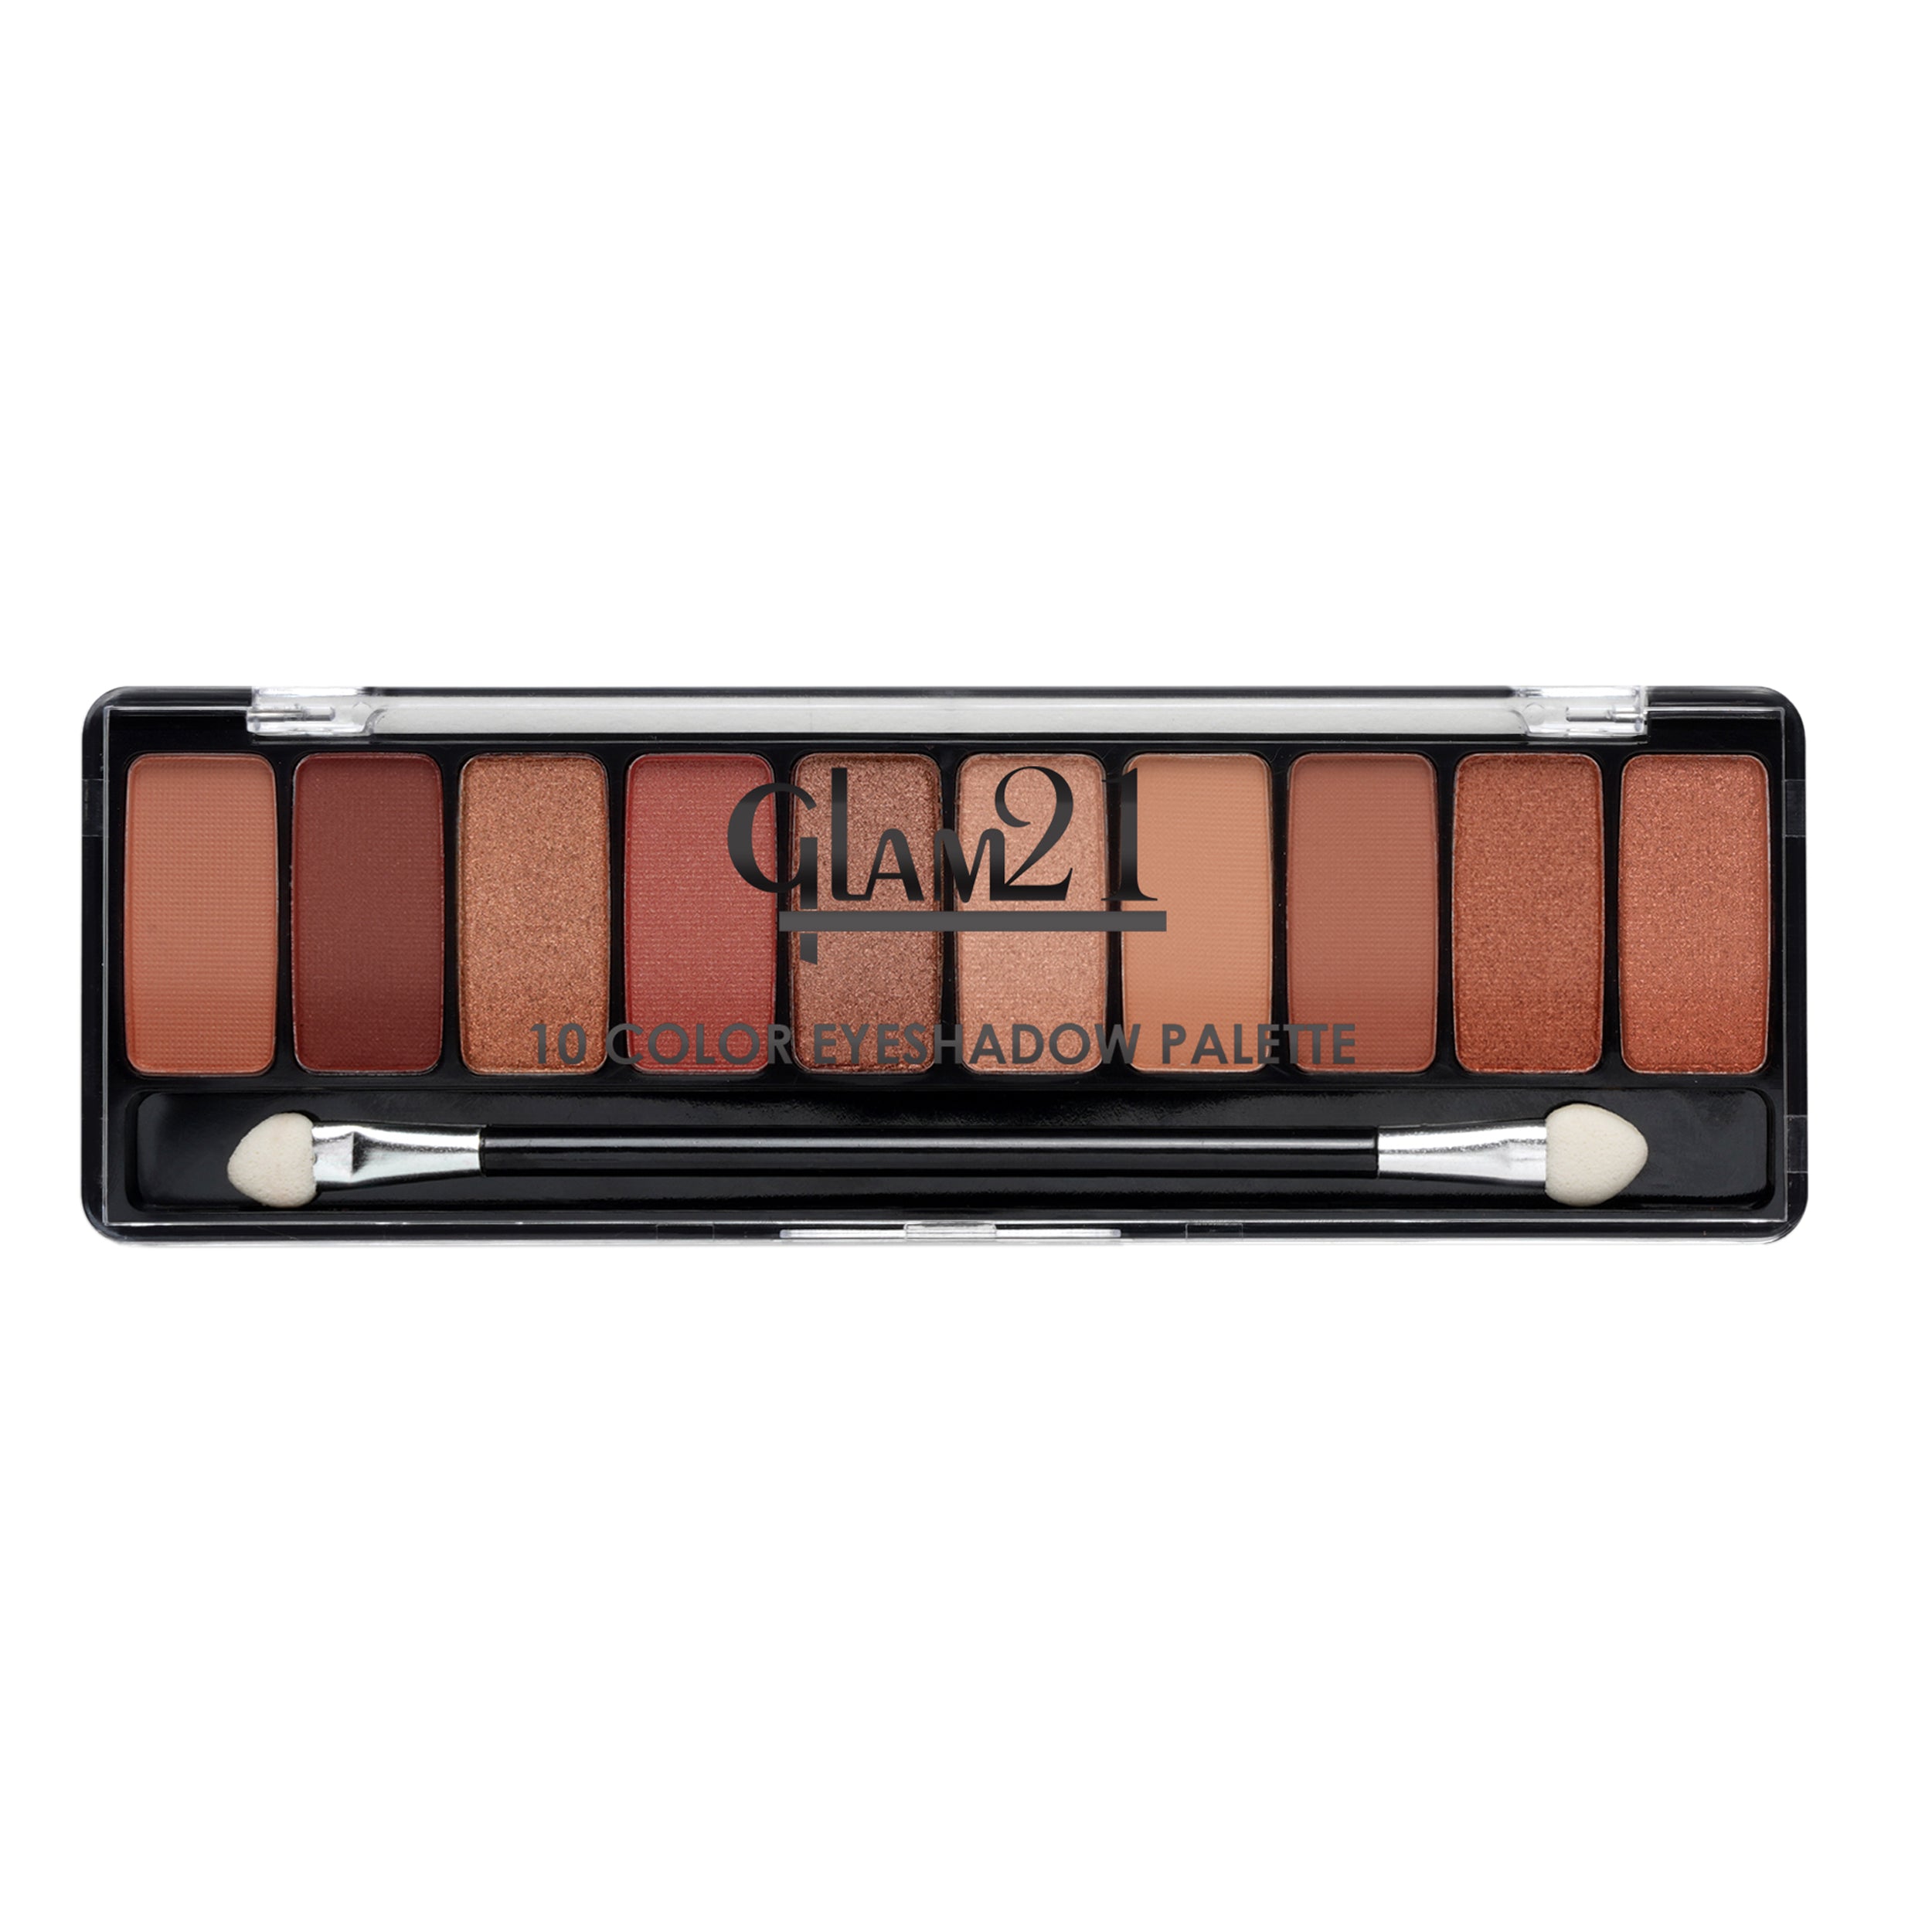 Glam21 10 Color Eyeshadow Palette - Soft Matte & Creamy Shimmer in Just One Swipe 8.8 g (Shade-02)